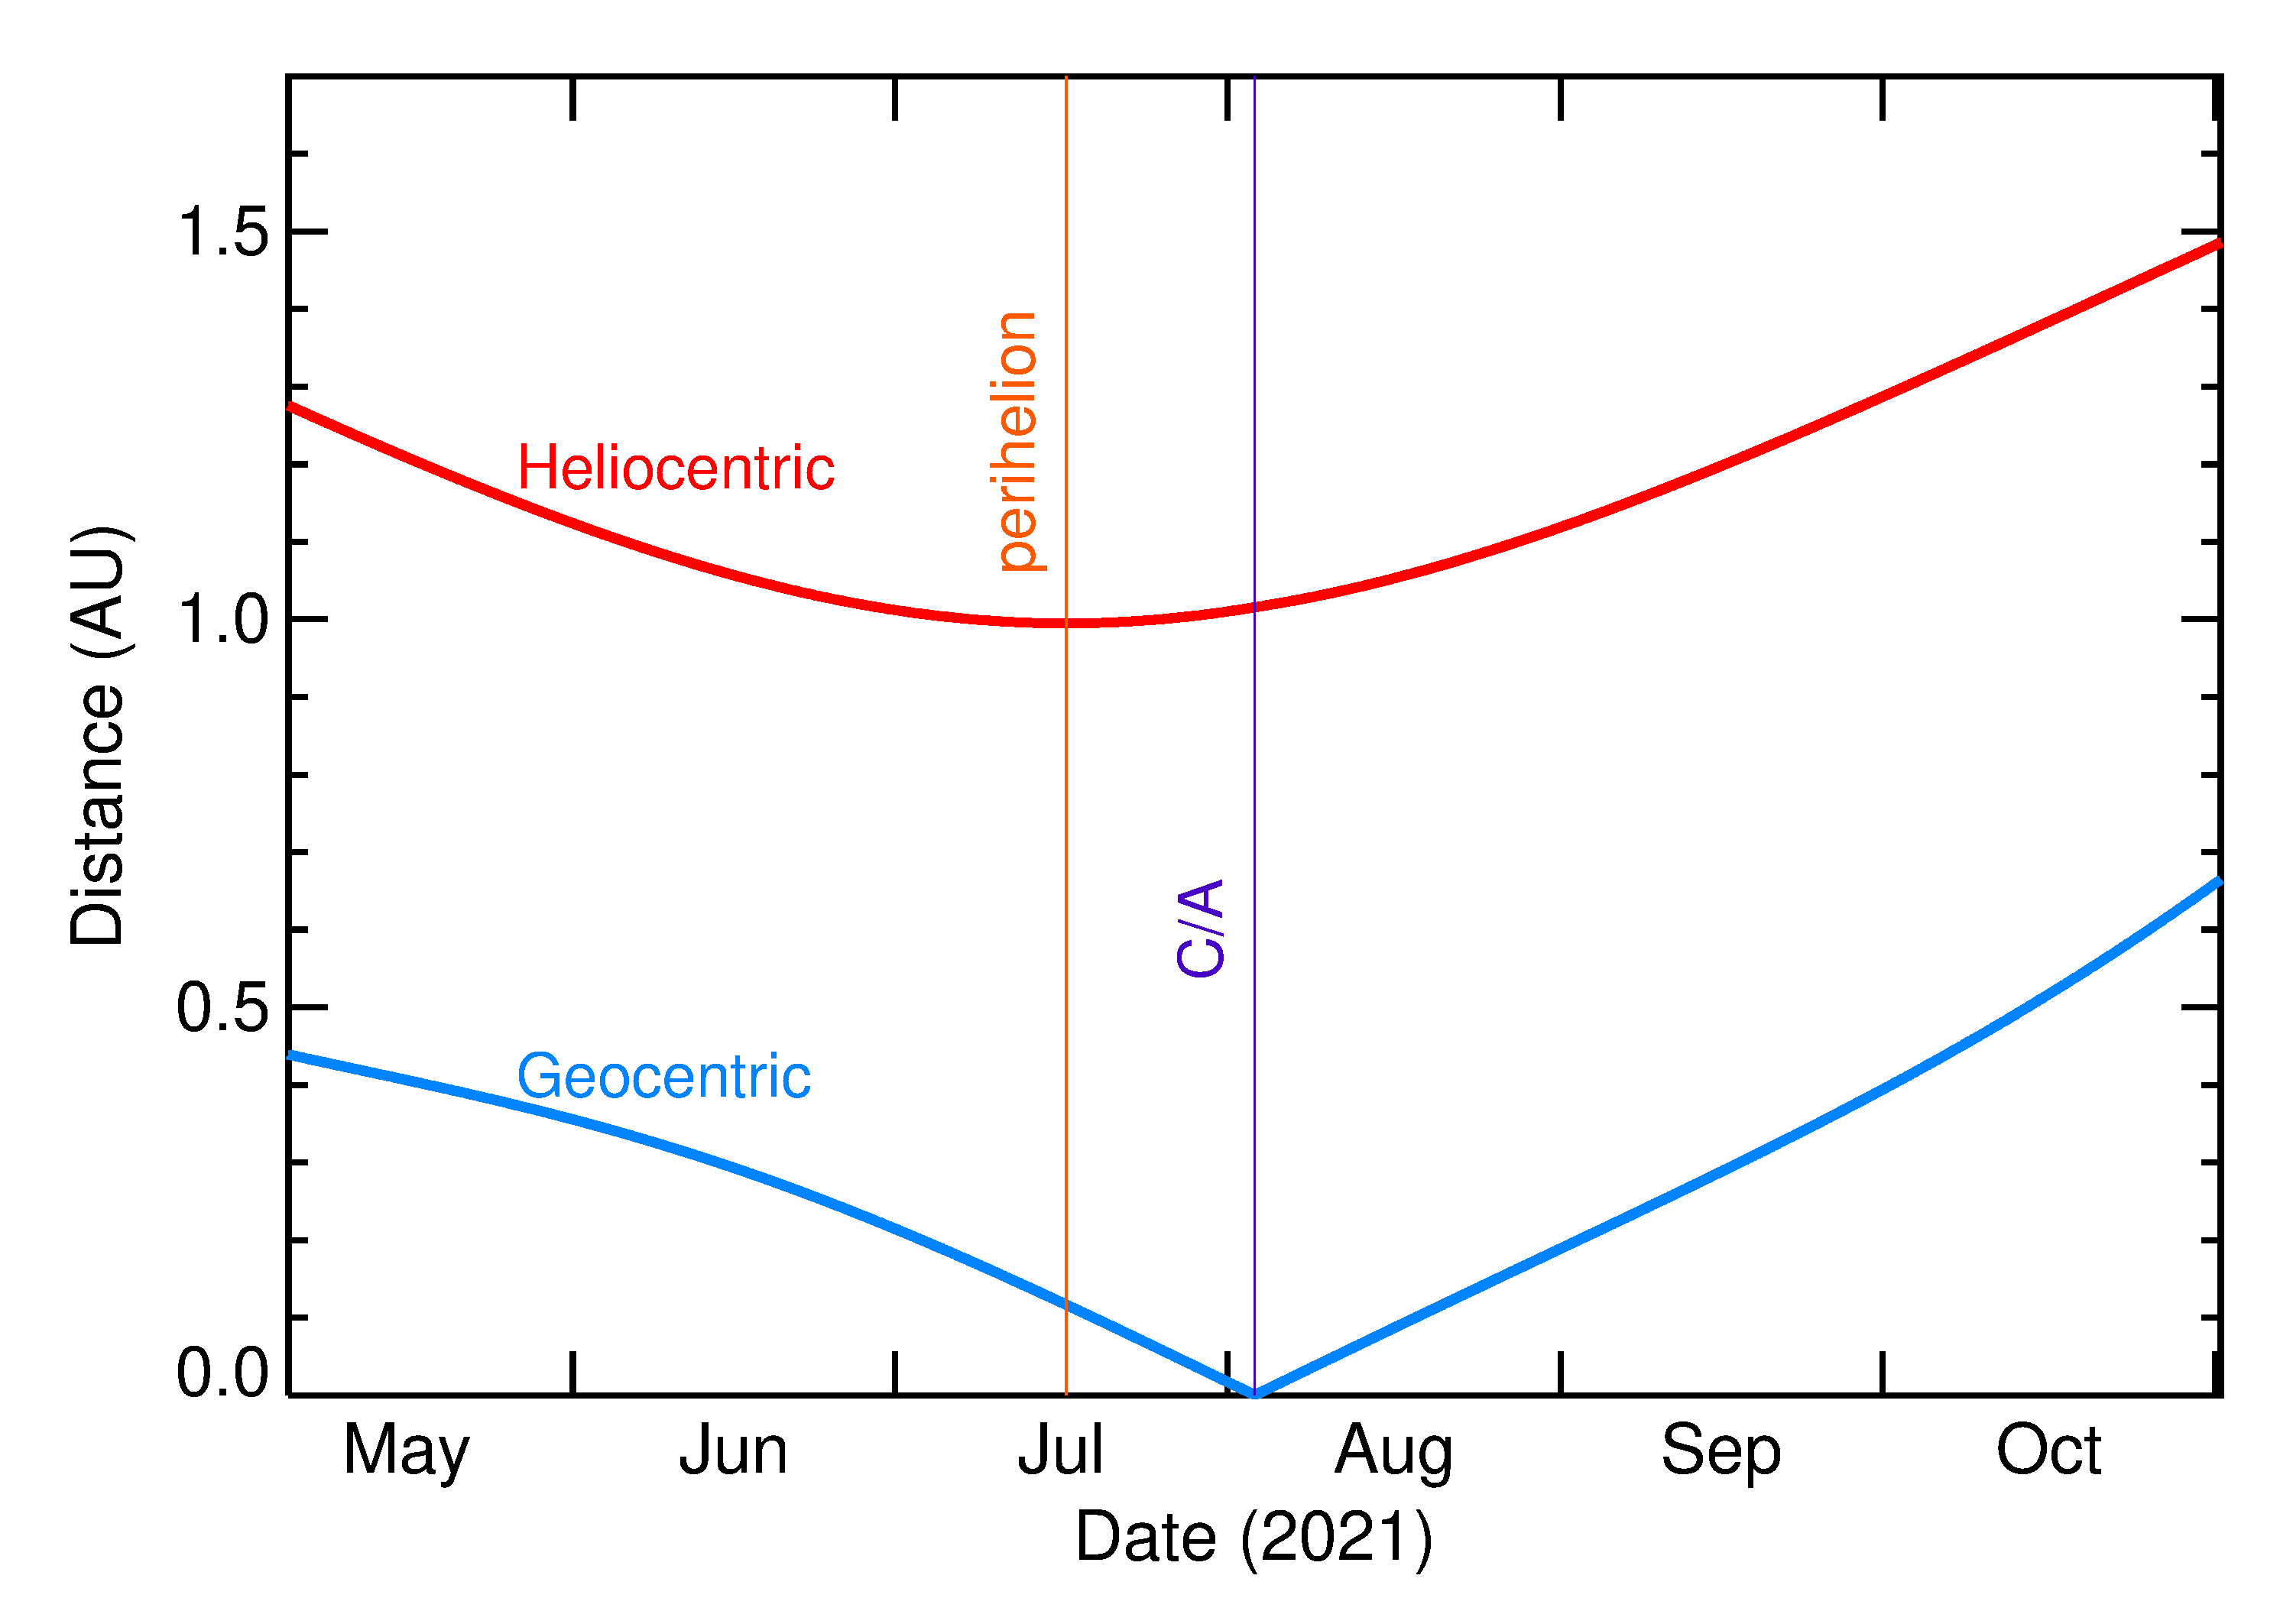 Heliocentric and Geocentric Distances of 2021 PC in the months around closest approach